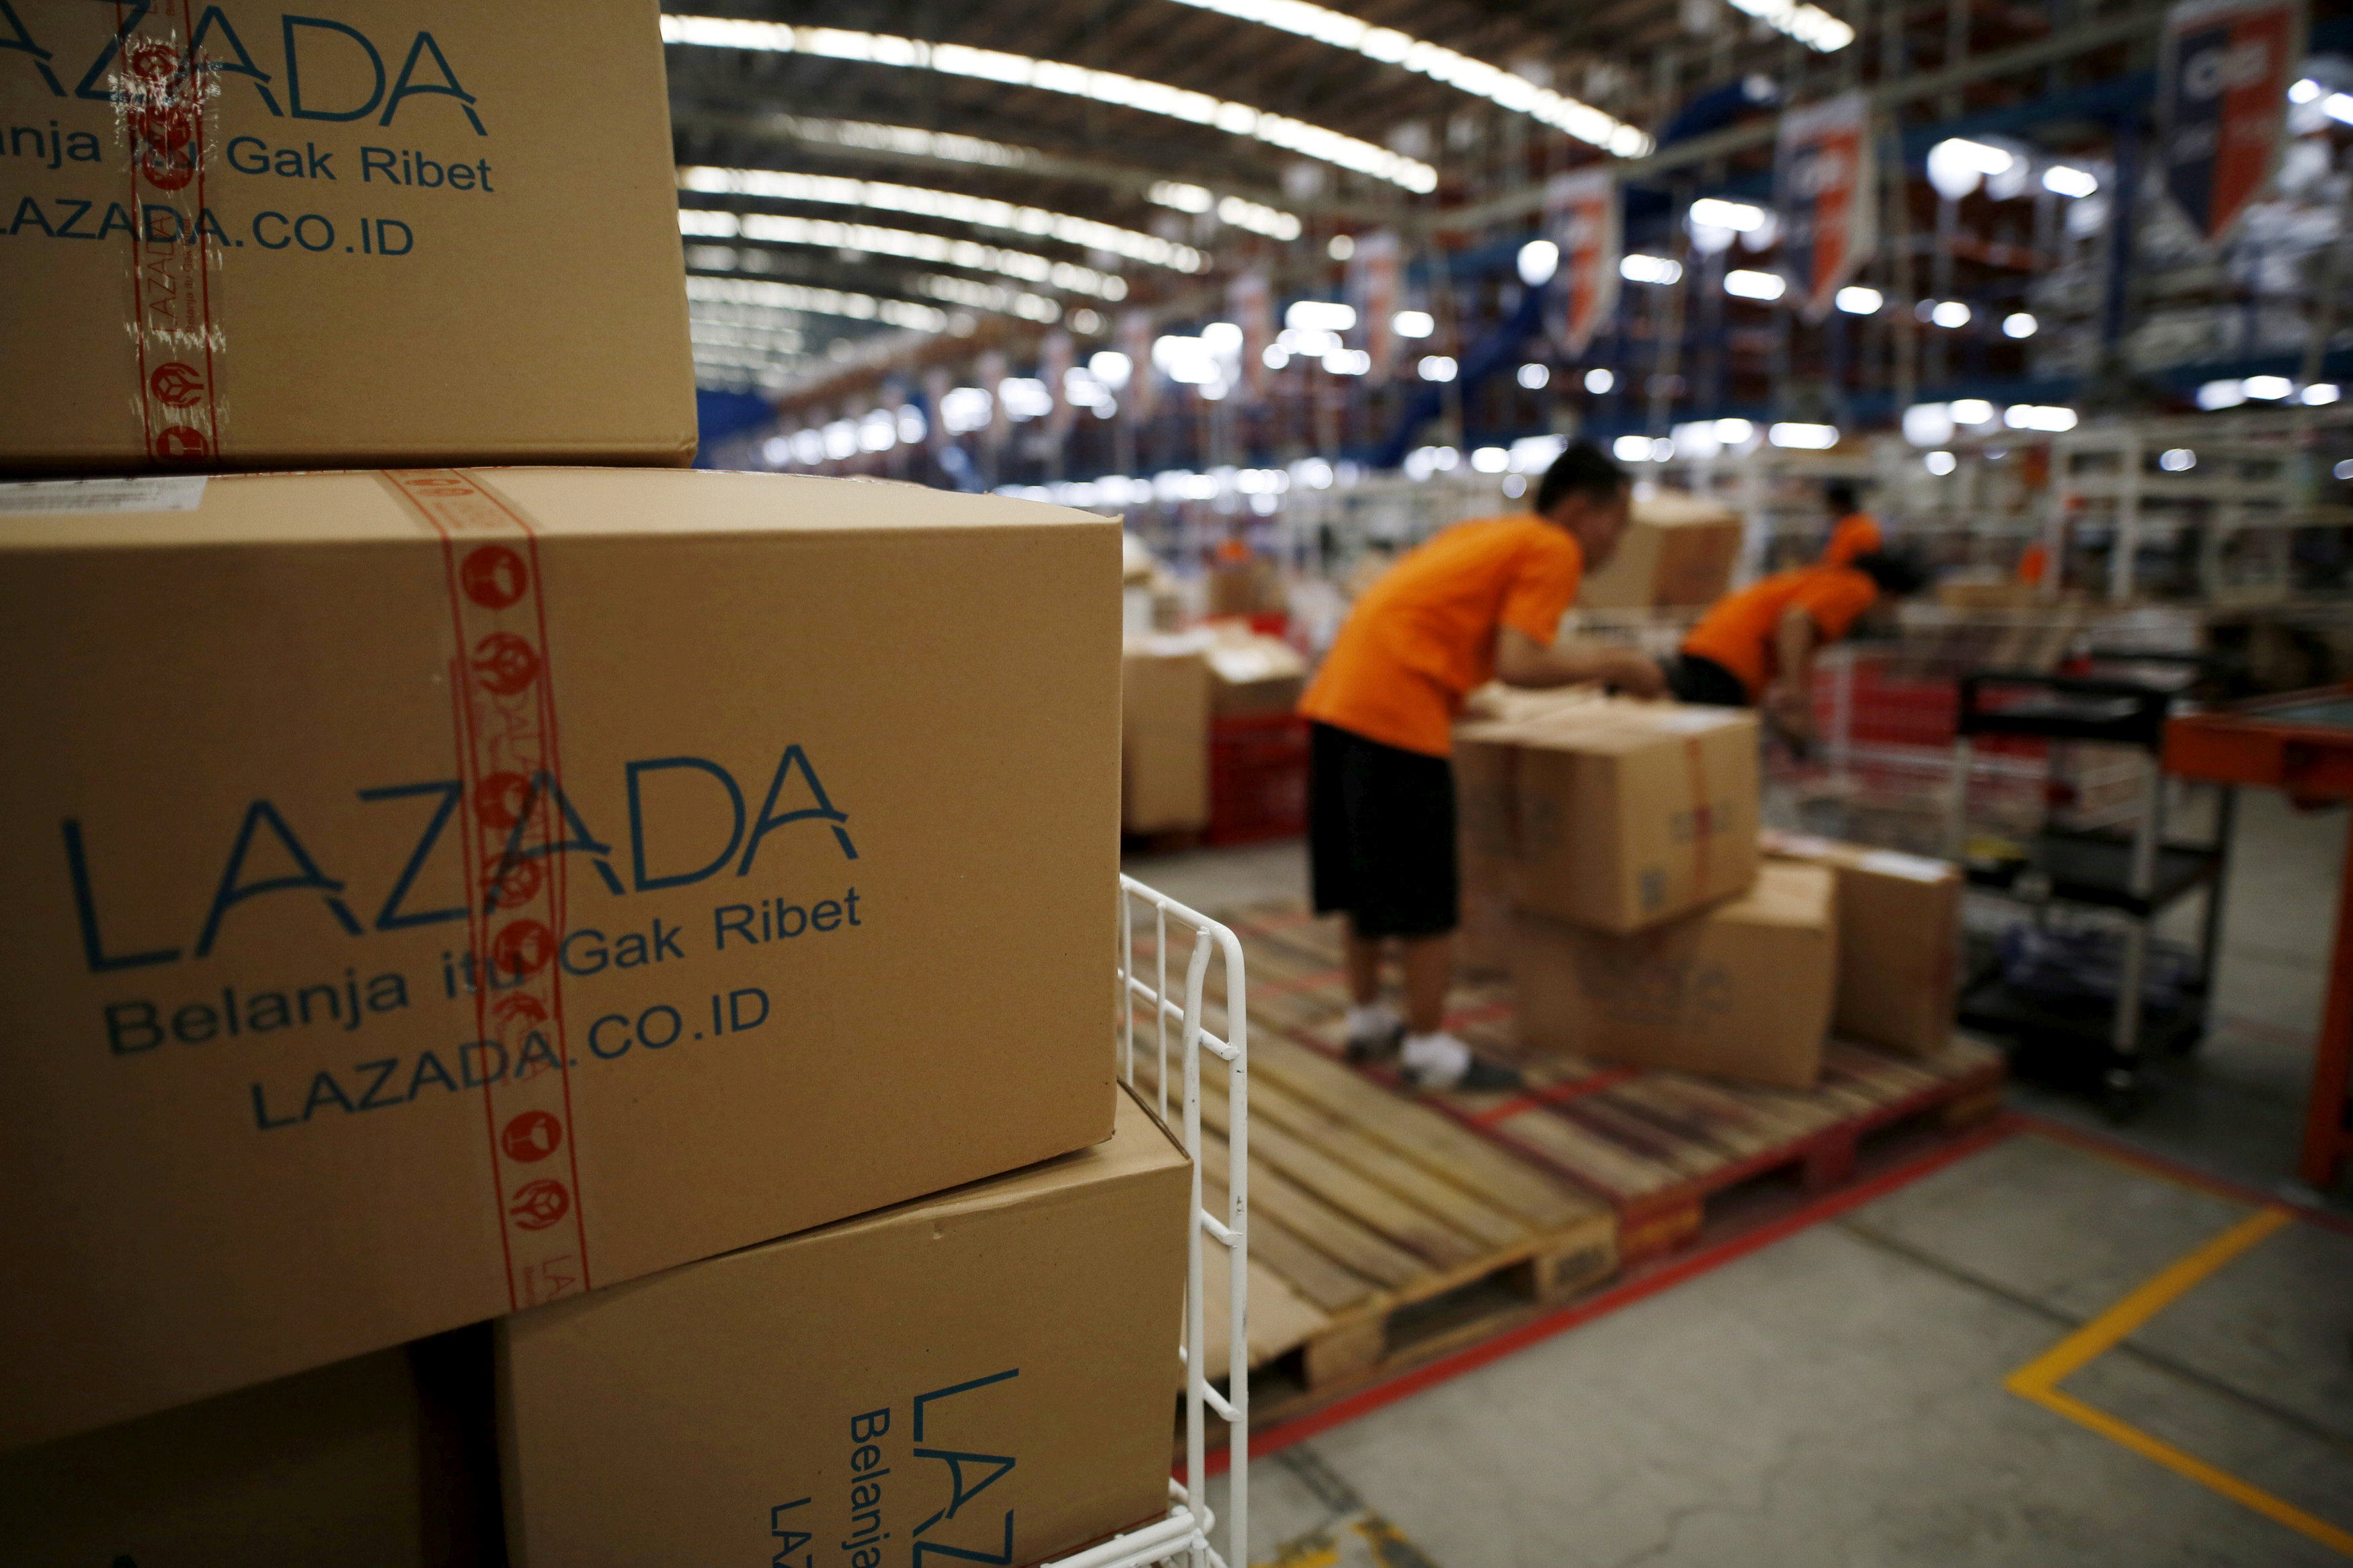 Thai police charged three social media influencers with lese majeste over controversial social media advertisements for an e-commerce firm Lazada that monarchists said mocked a member of the royal family. Photo: Reuters